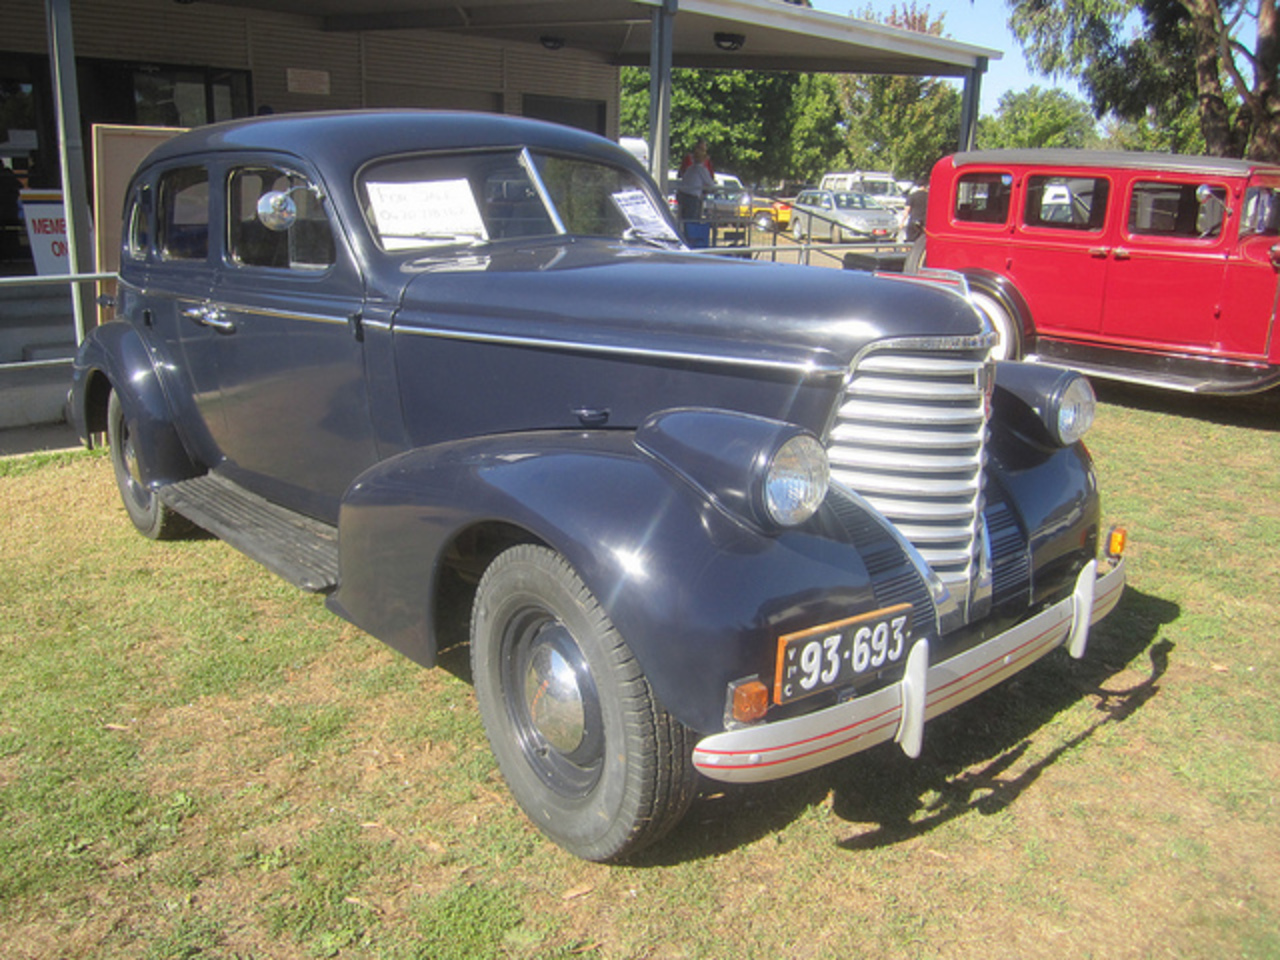 1938 Oldsmobile F.38 Sedan. From 1932-38 the Oldsmobile was available in 2